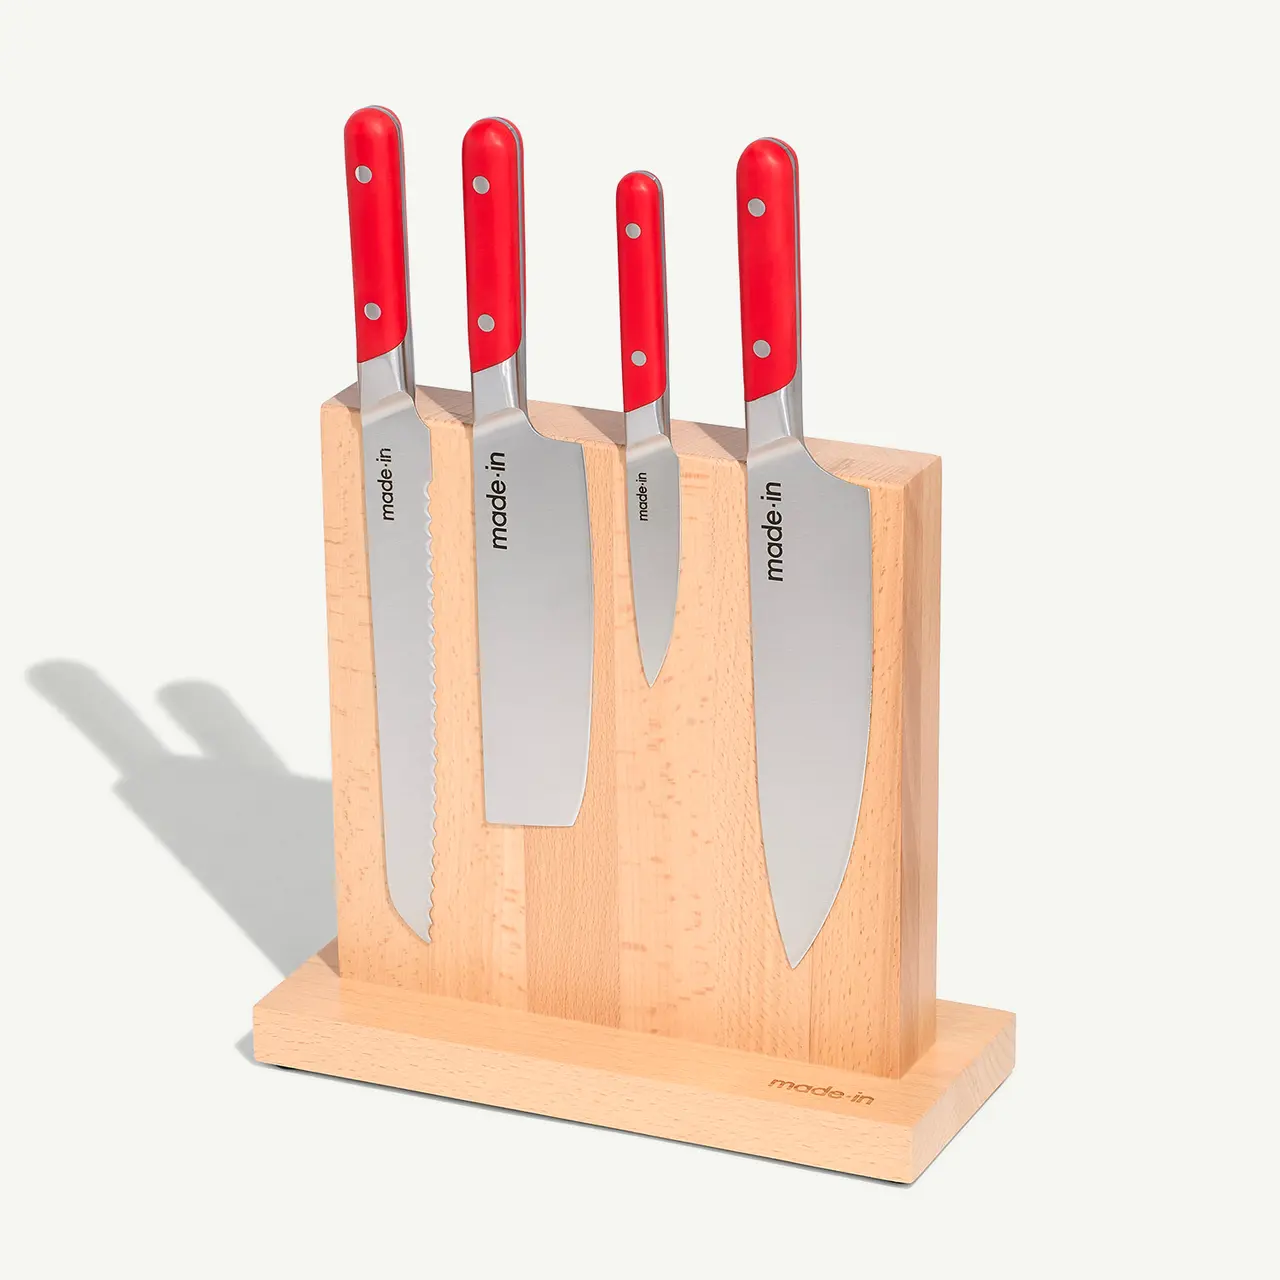 A set of four kitchen knives with red handles is neatly arranged in a light wooden knife block casting a shadow on the surface behind it.